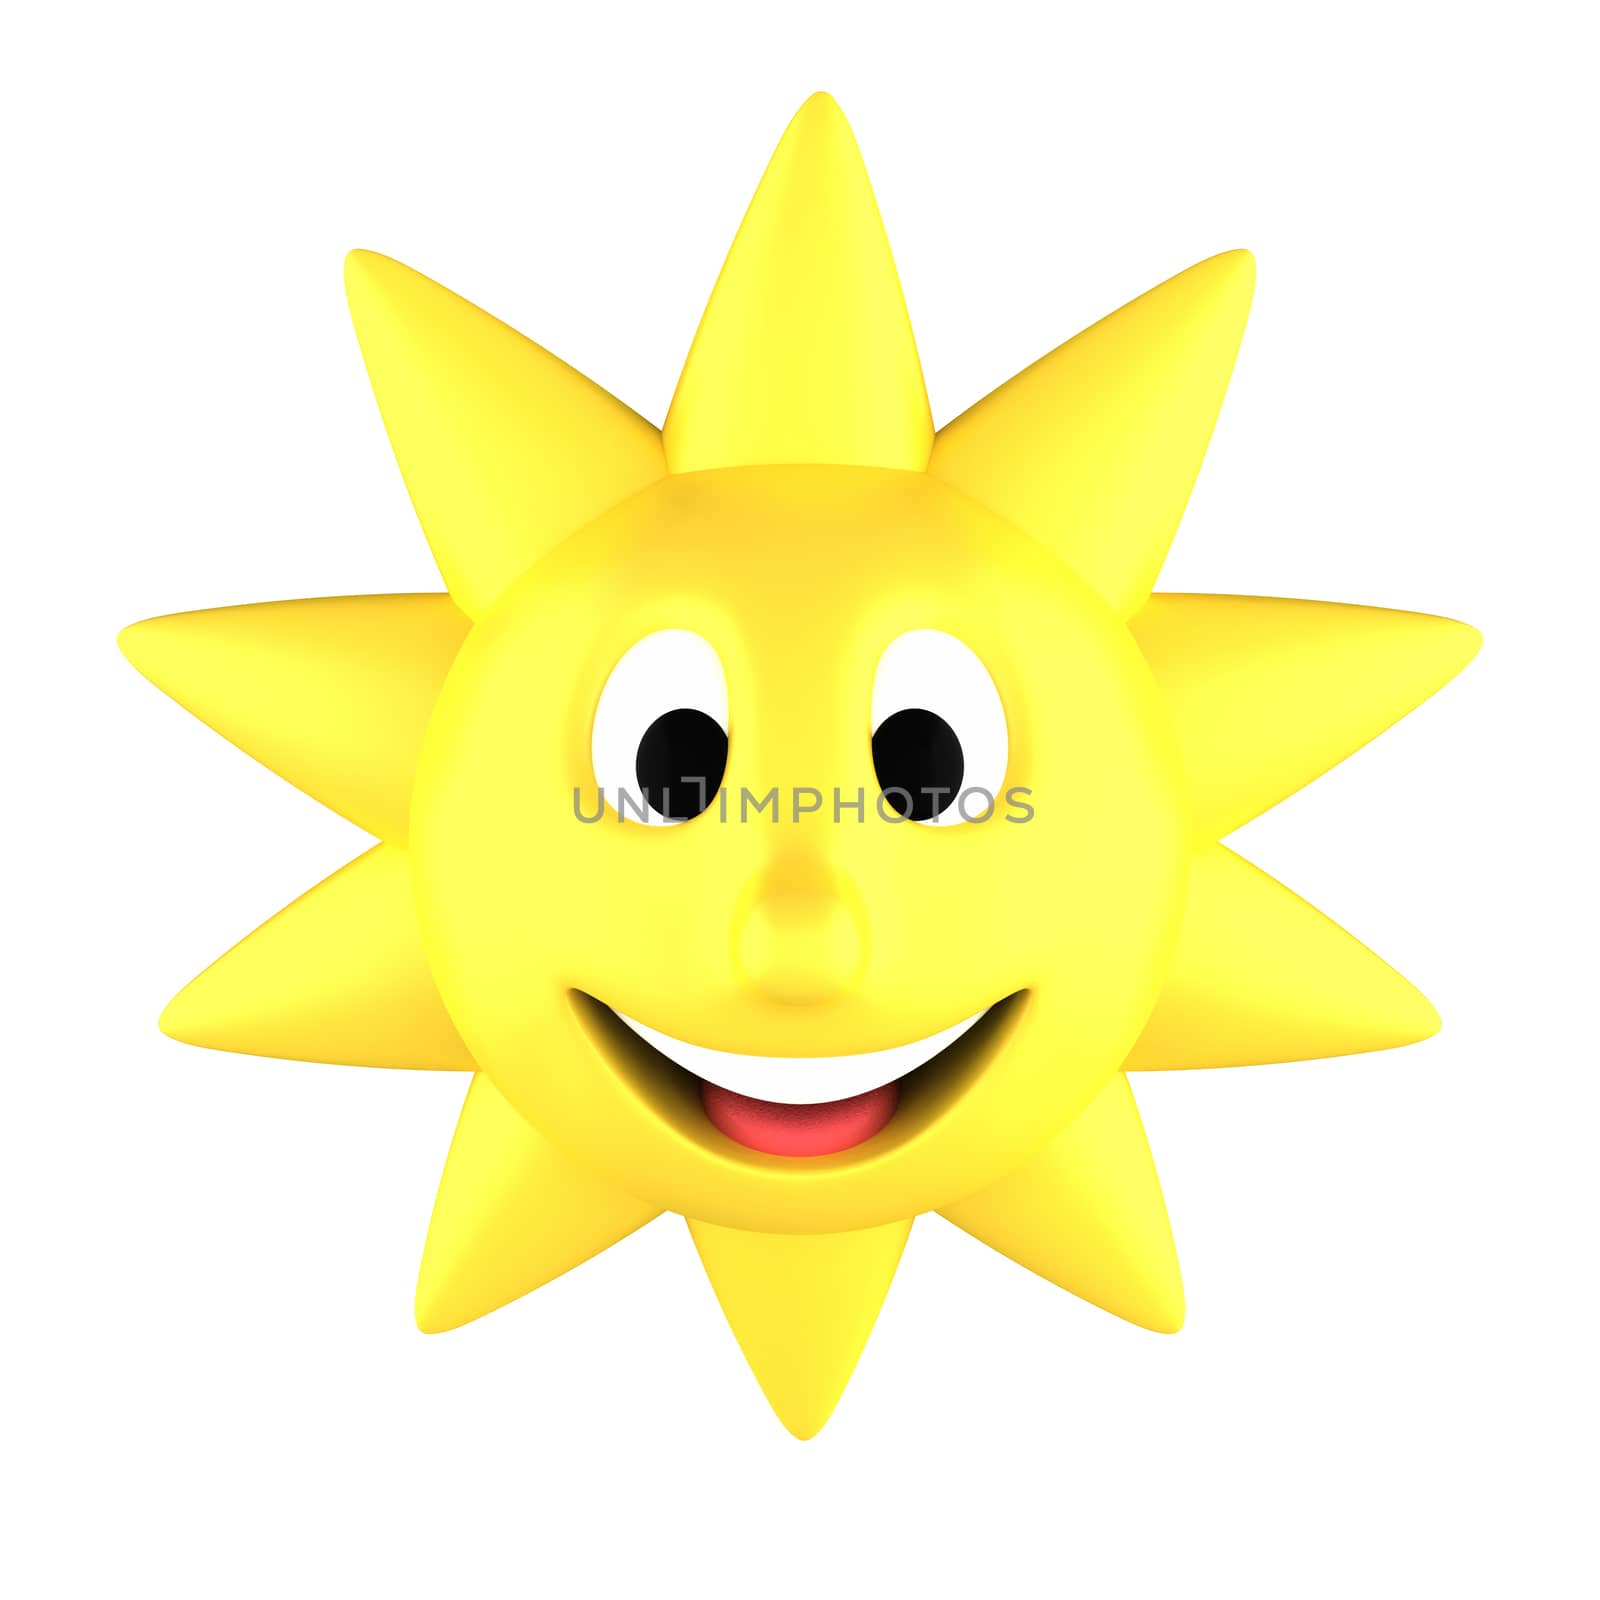 Yellow sun smiling, isolated on white background